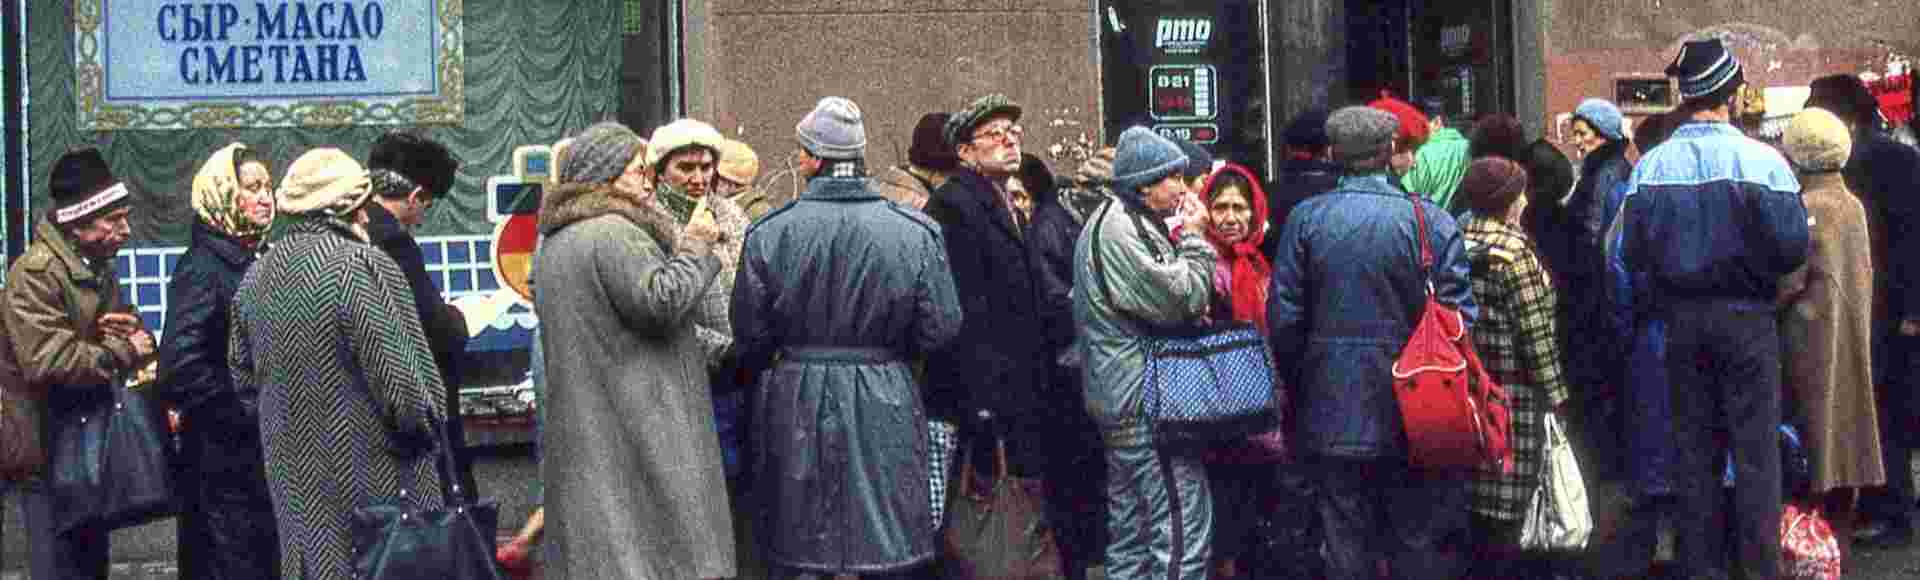 Muscovites queue up outside a shop selling milk and dairy products in Moscow during difficult economic times just before the dissolution of the USSR.